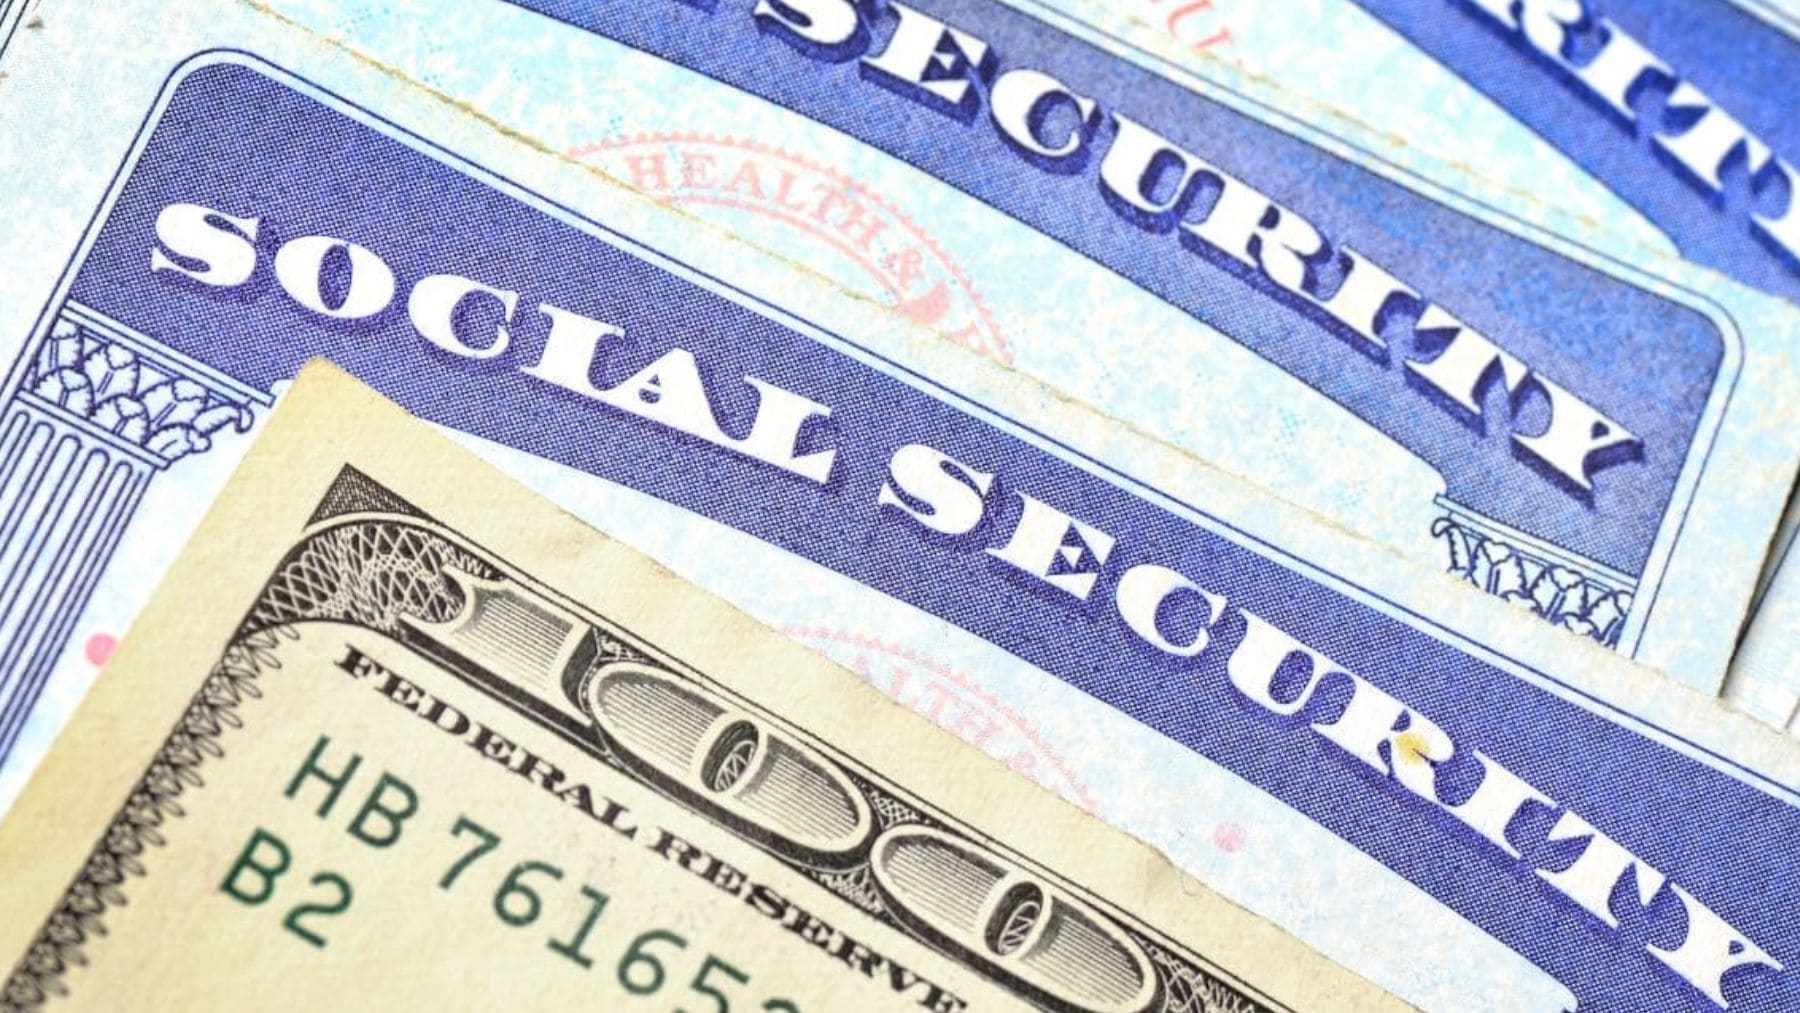 Social Security cards with retirement money